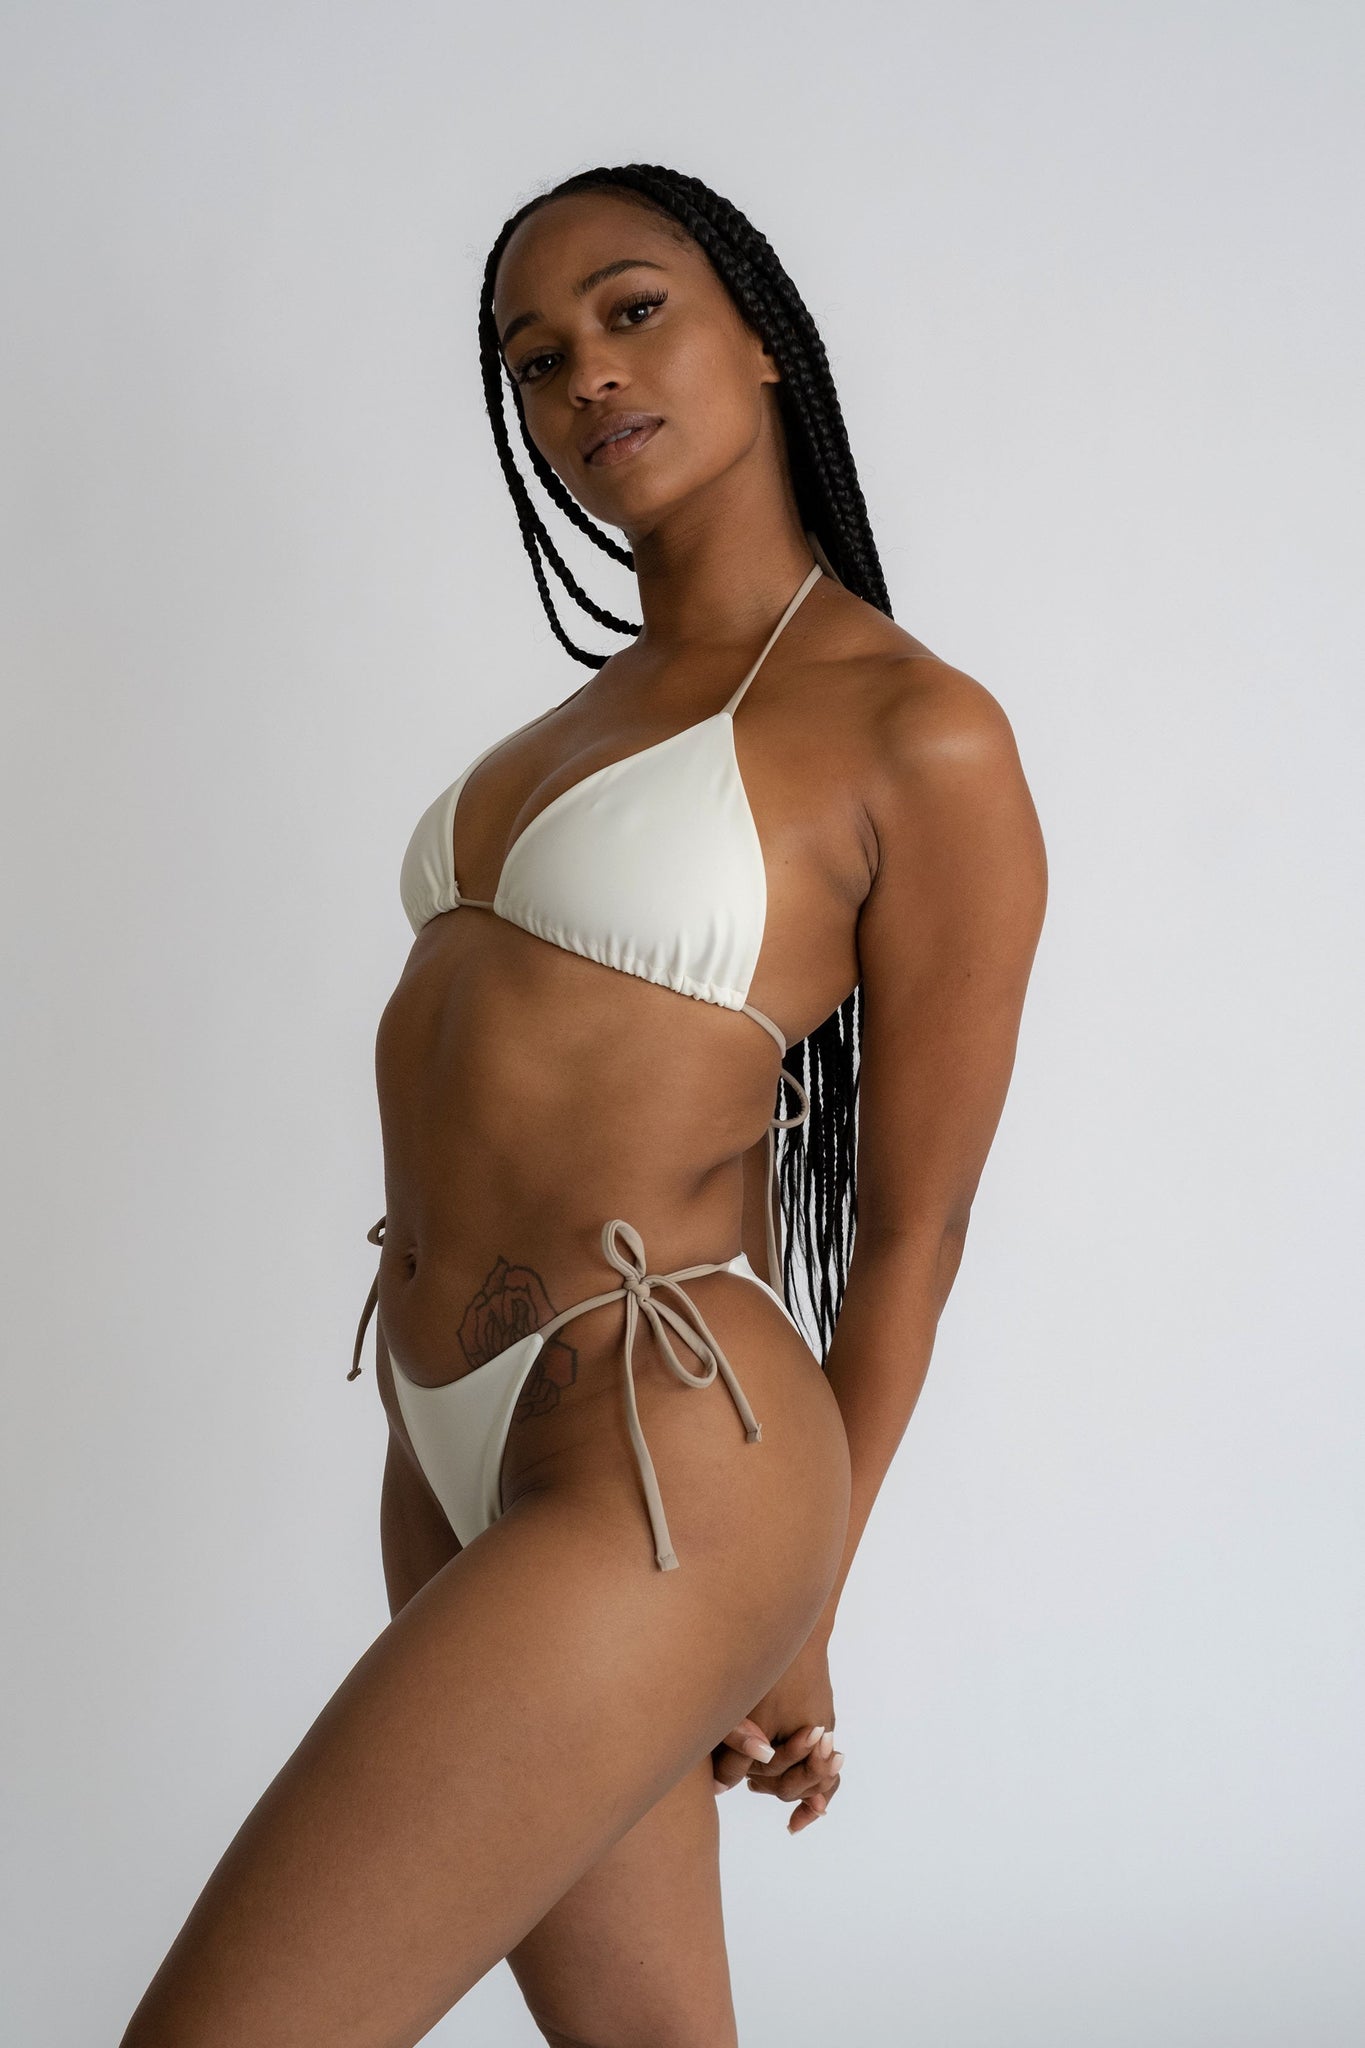 A woman standing with her arms wrapped behind her wearing white triangle bikini bottoms with nude adjustable strings with a matching white triangle bikini top and nude adjustable straps.